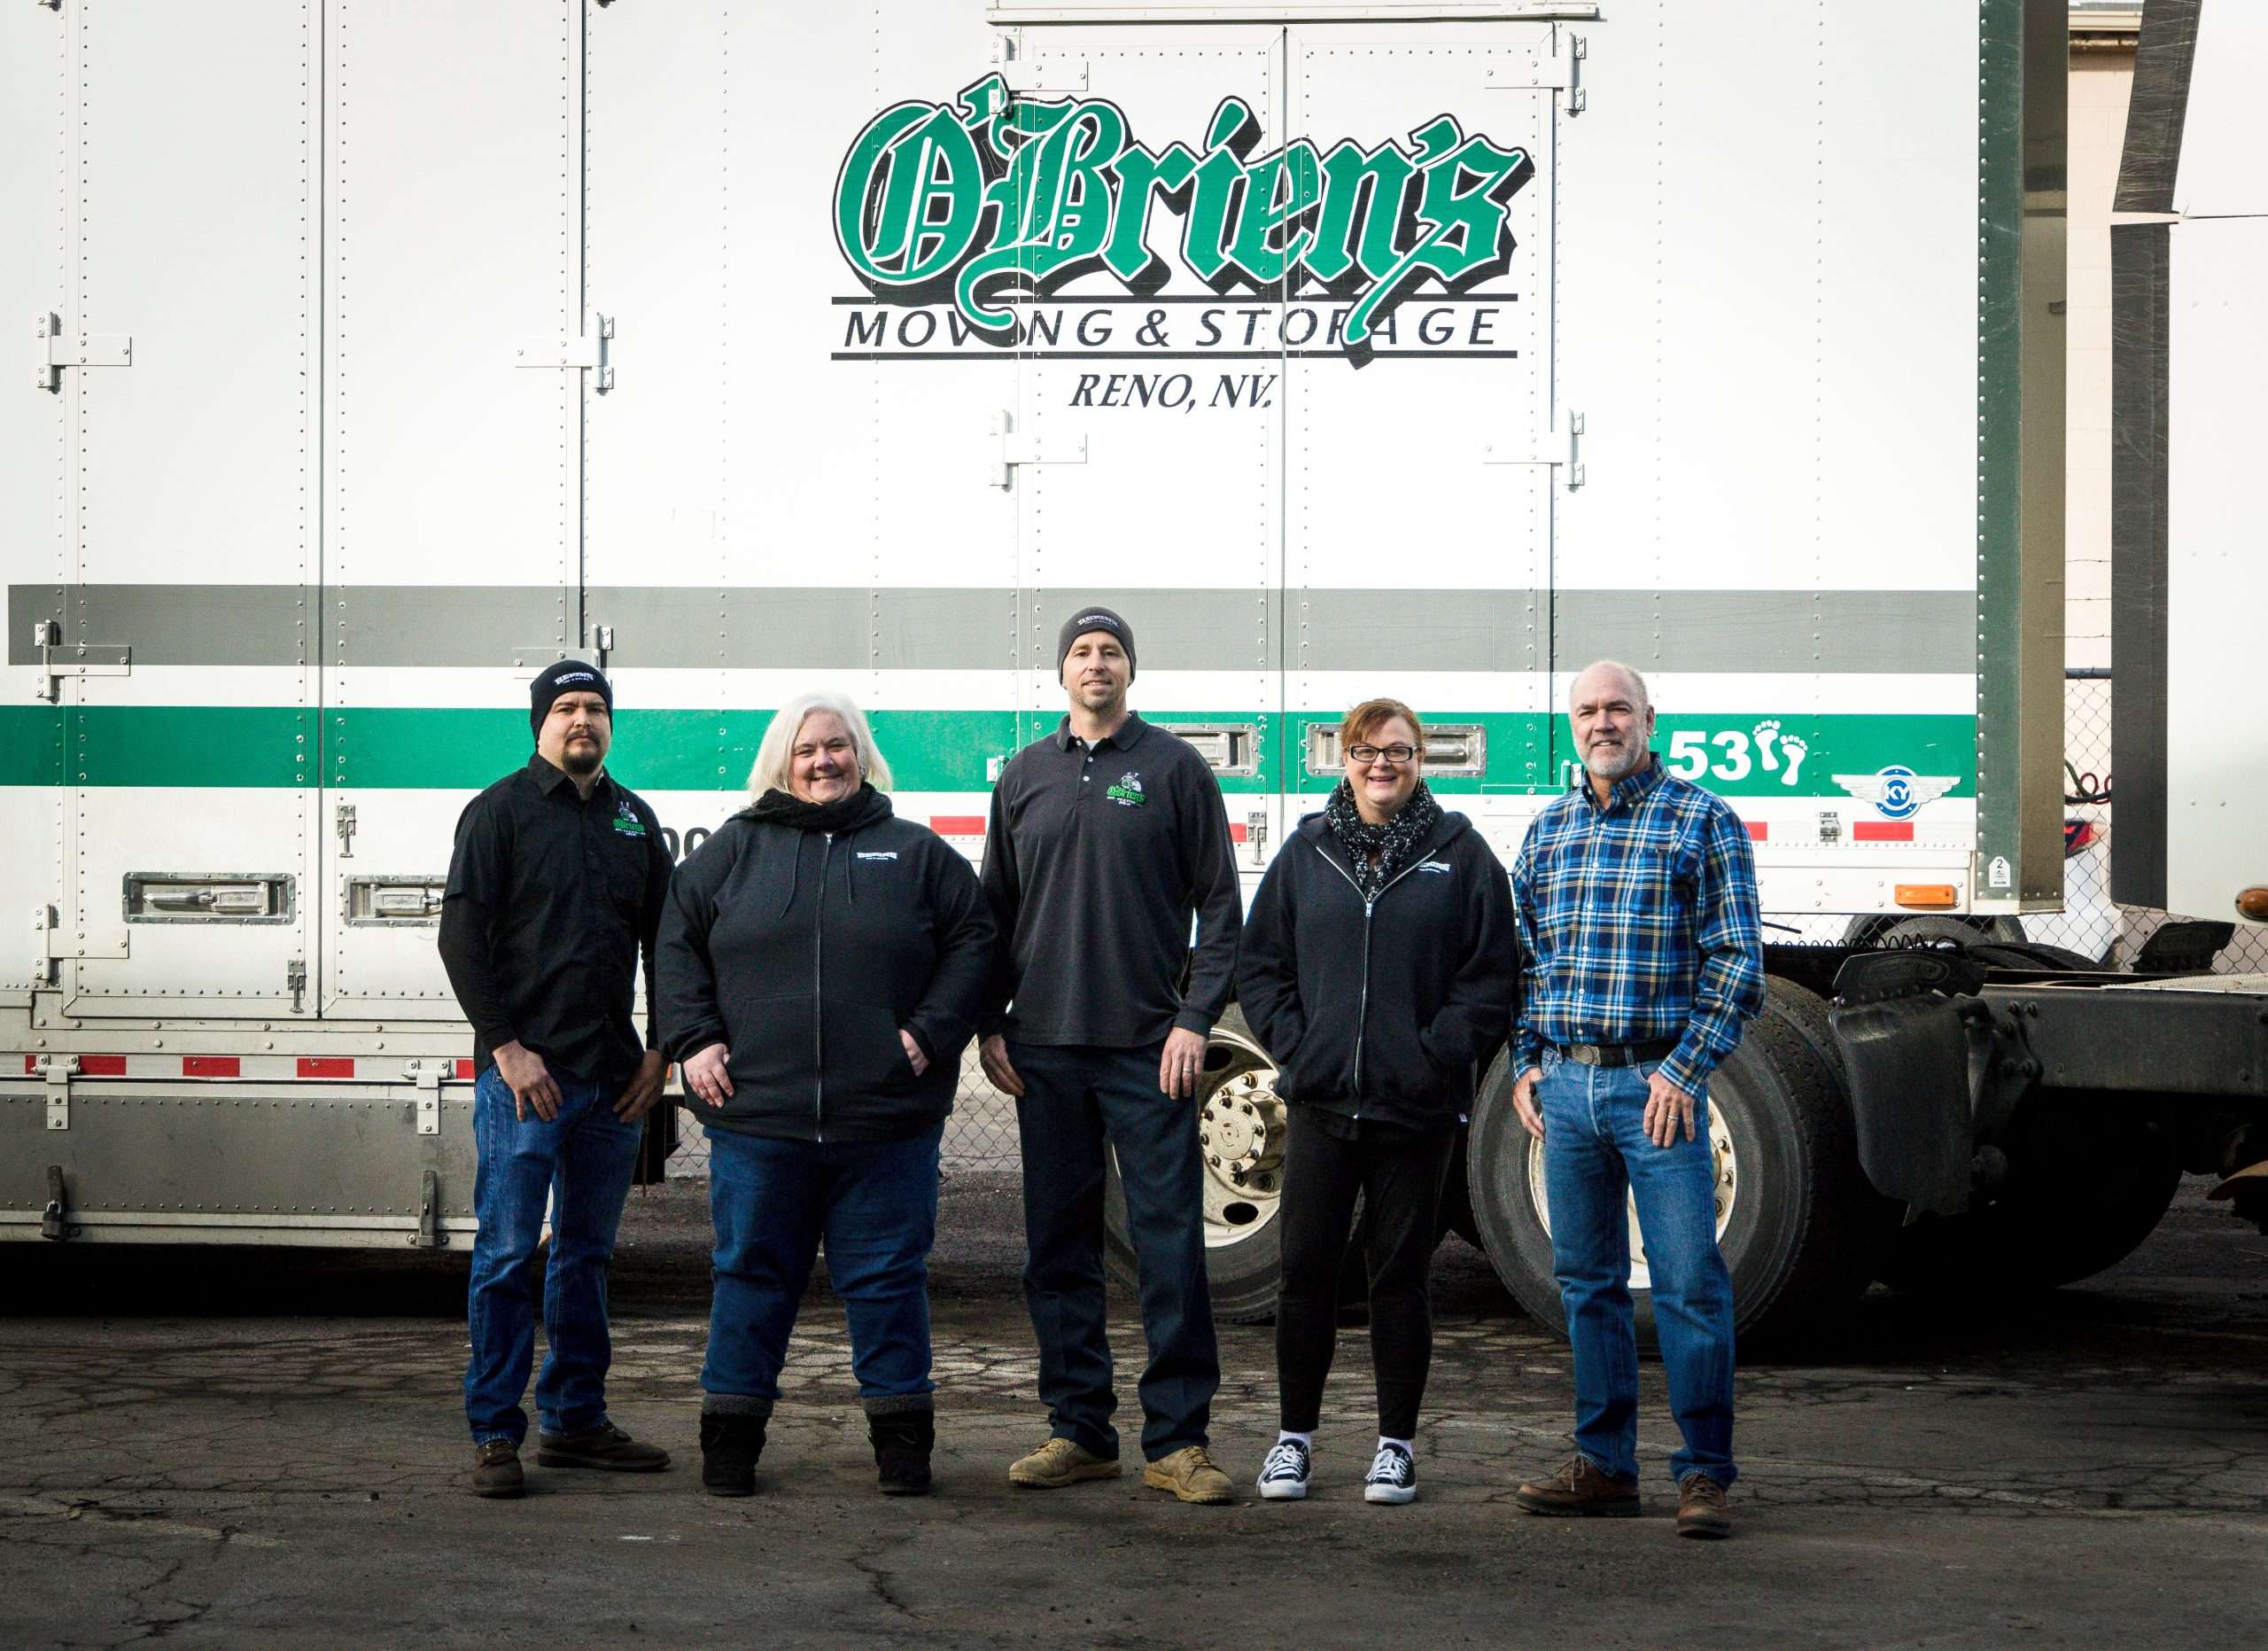 O'Briens Moving and Storage Owners Standing in front of Semi- trailer